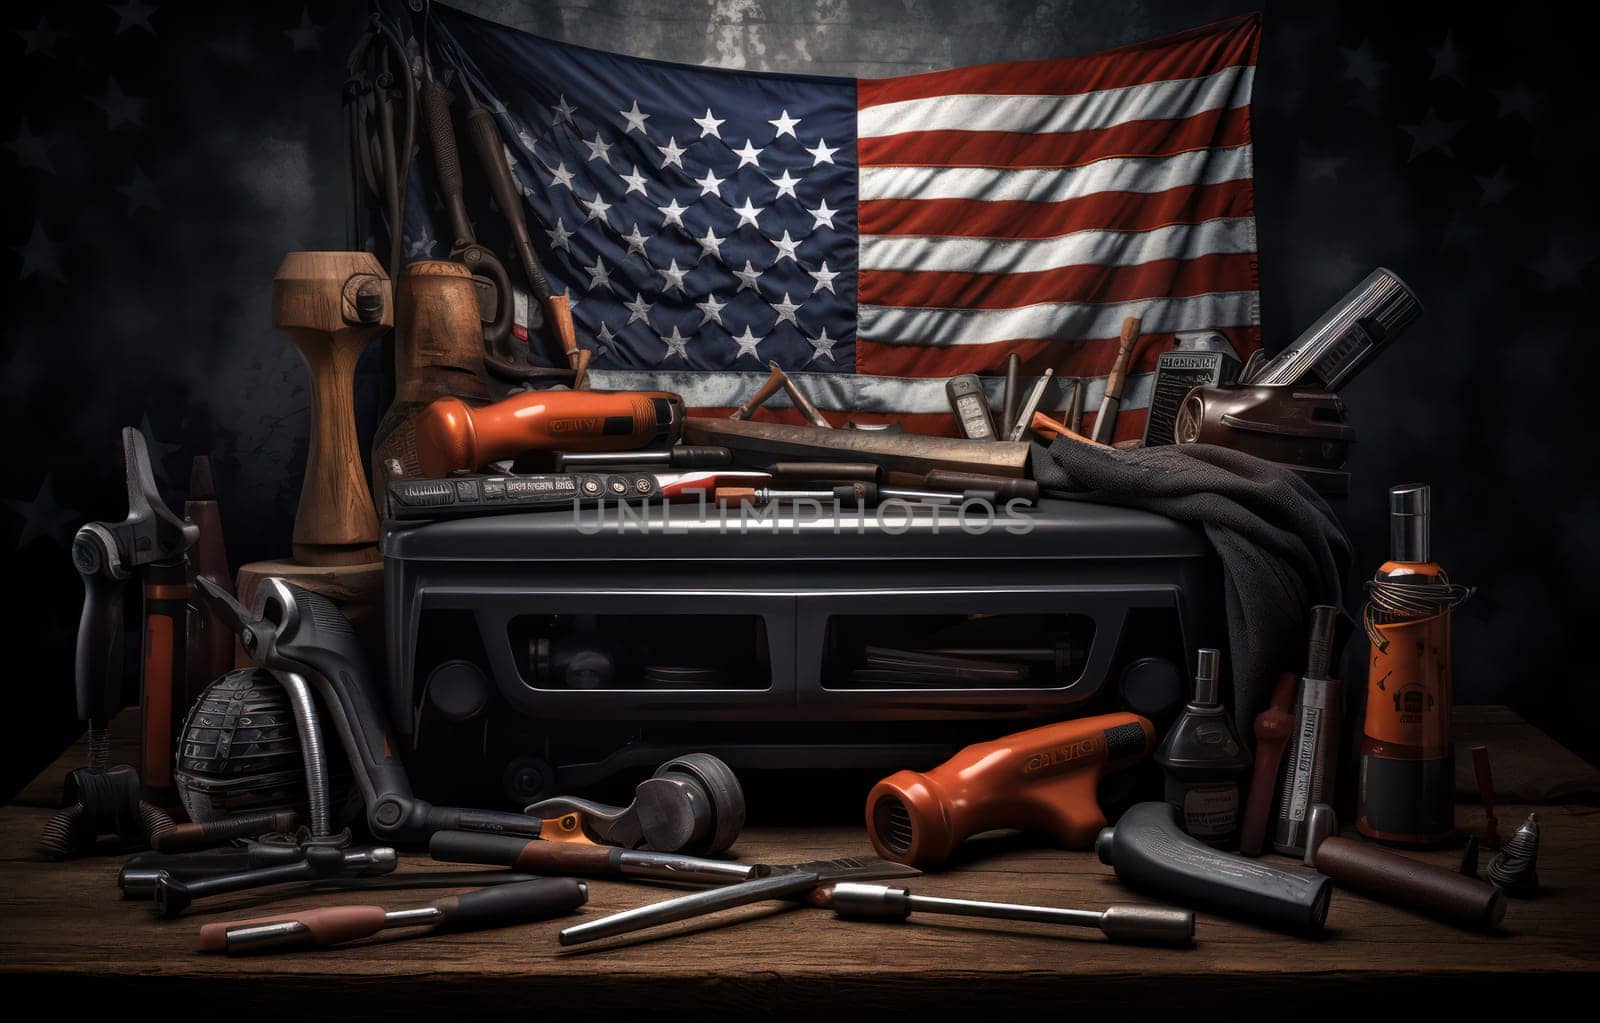 United Labor: Celebrating American Workforce with Patriotic Tools on Labor Day - A Symbolic National Image of Industrial Construction Equipment on Wooden Table with Flag Background by Vichizh